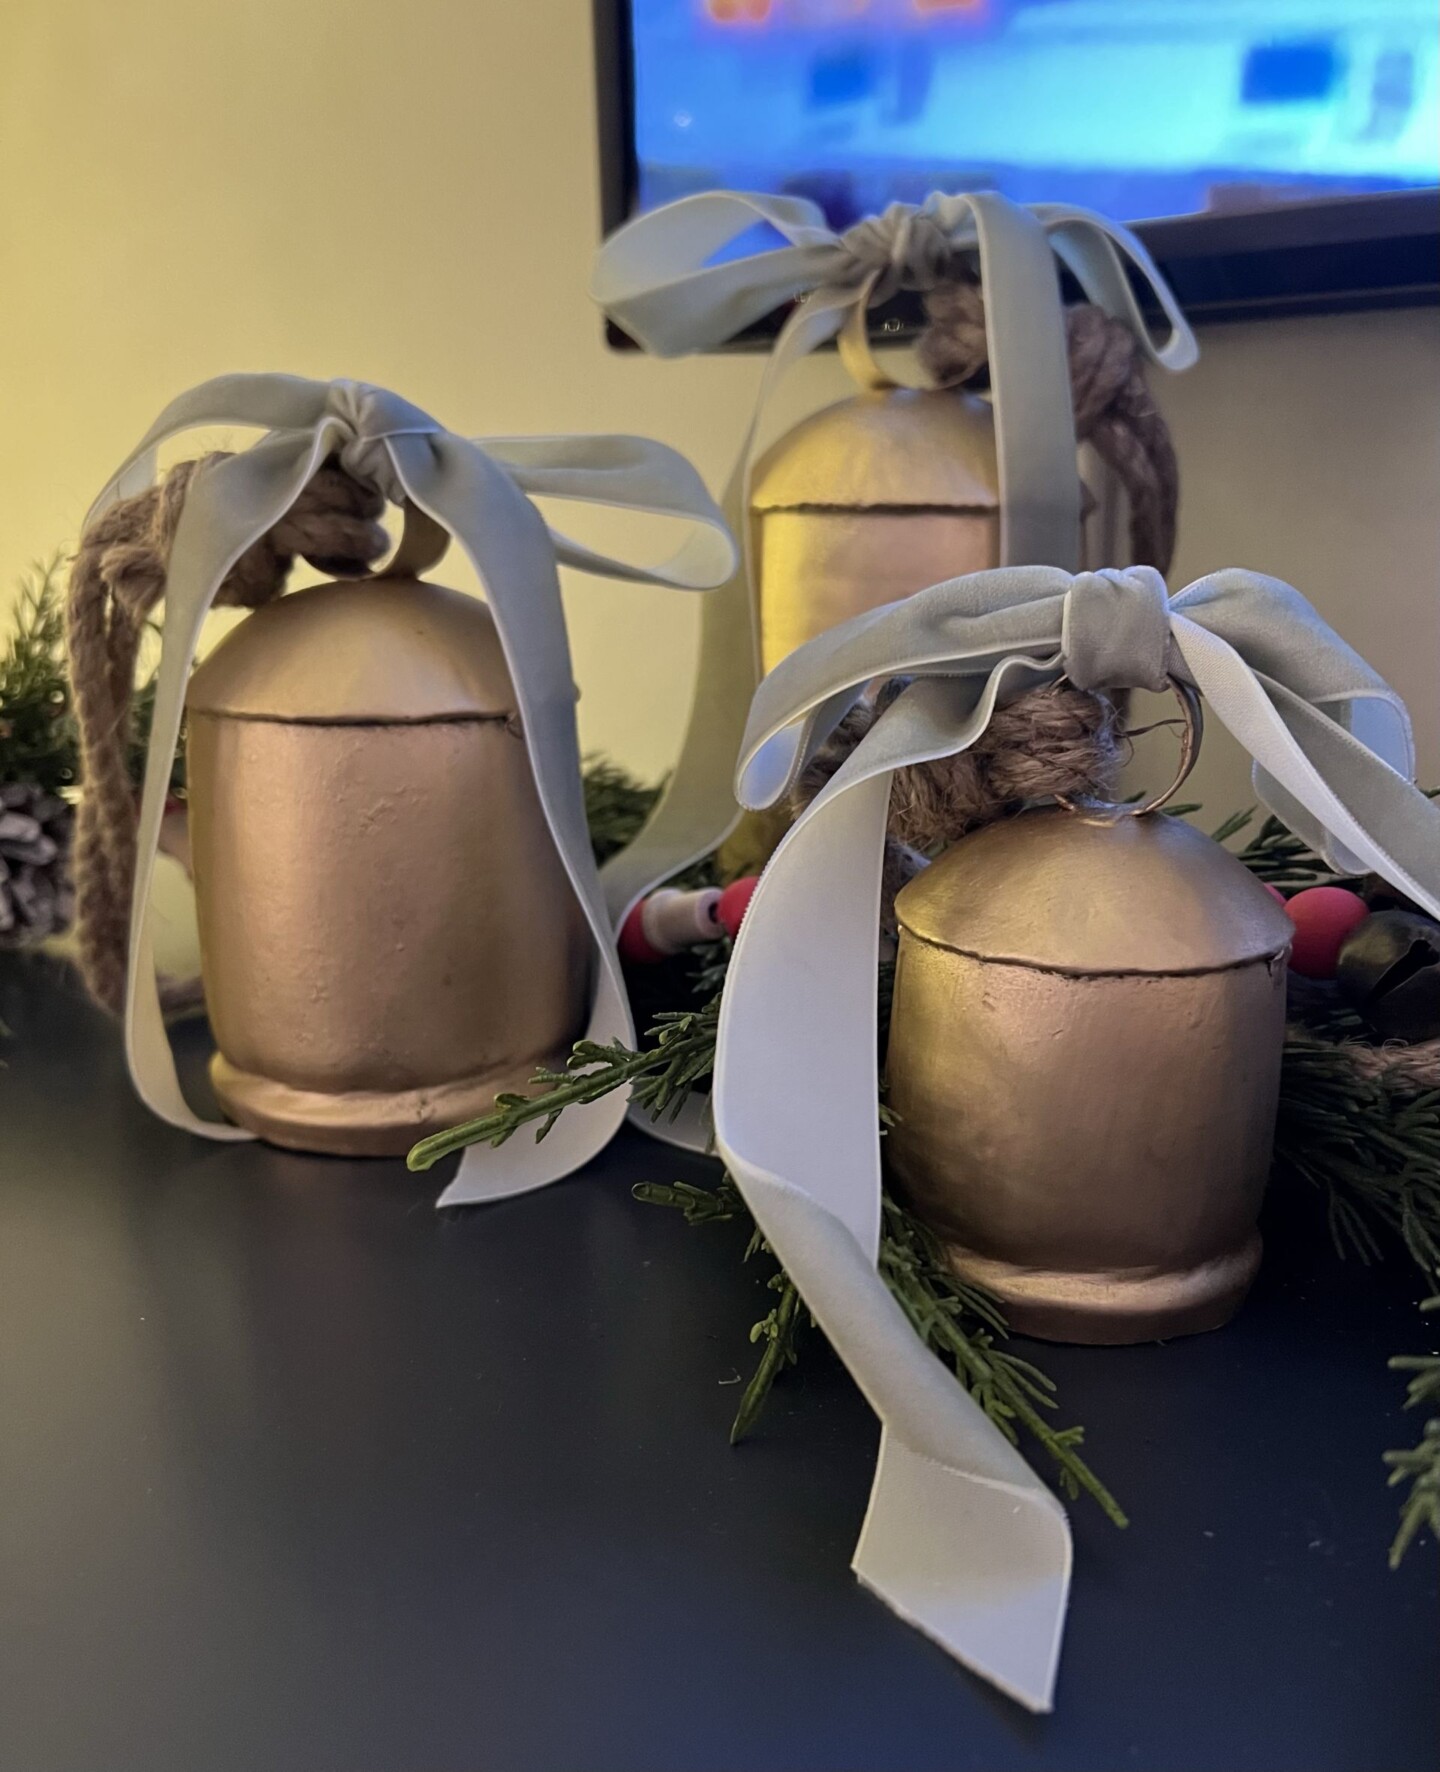 Large Christmas bells from Amazon 